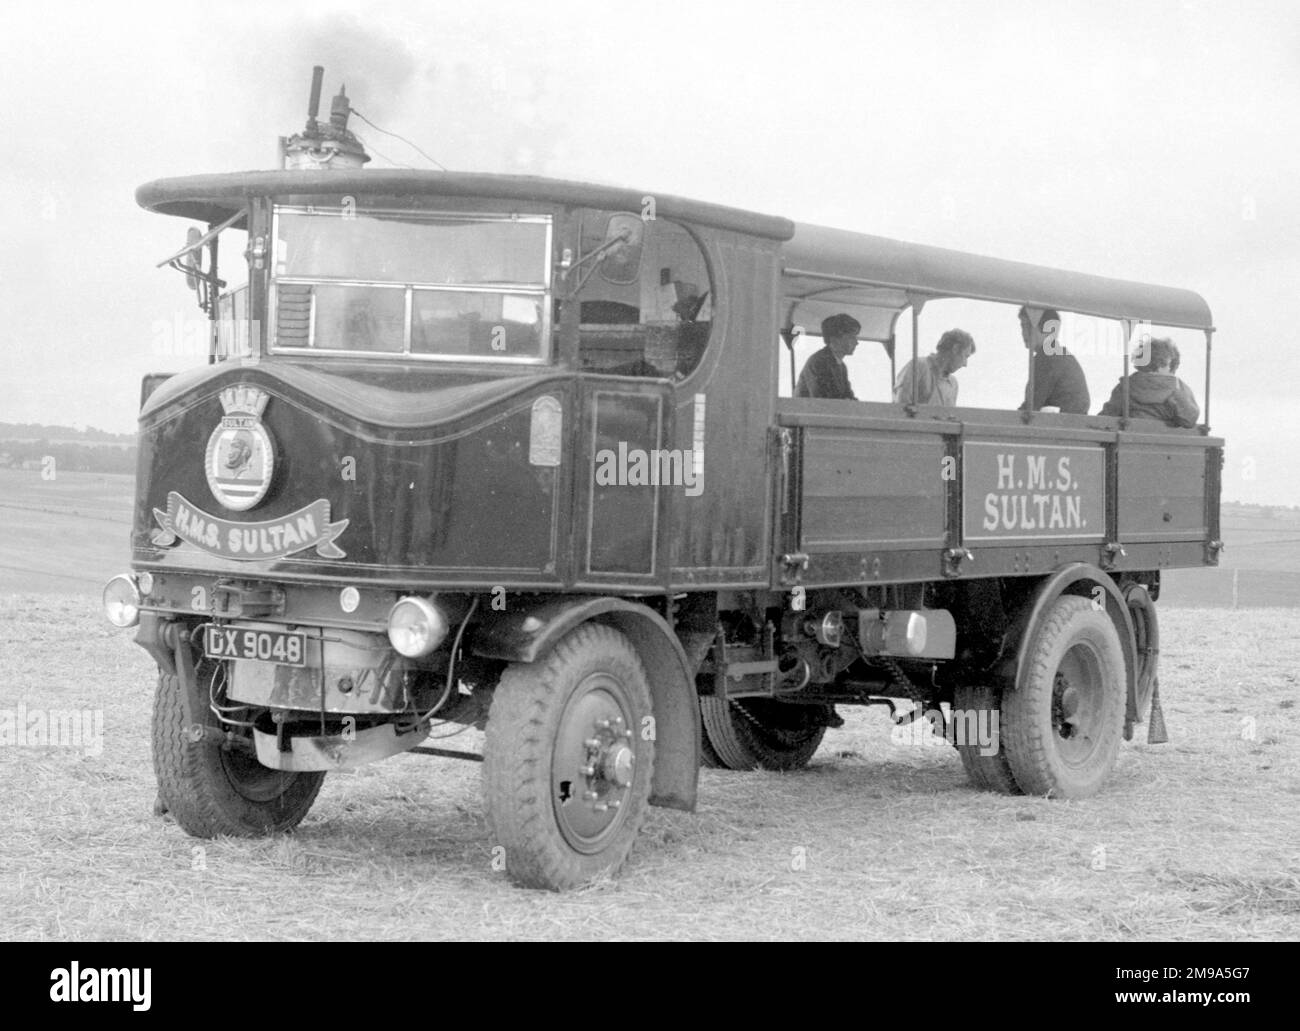 Sentinel Wagon 8393, HMS Sultan at the 1969 Stourpaine rally:- Maker: Sentinel Waggon Works Ltd Type: Wagon Number: 8393 Built: 1930 Registration: DX 9048 Class: SUP Name: HMS Sultan Stock Photo